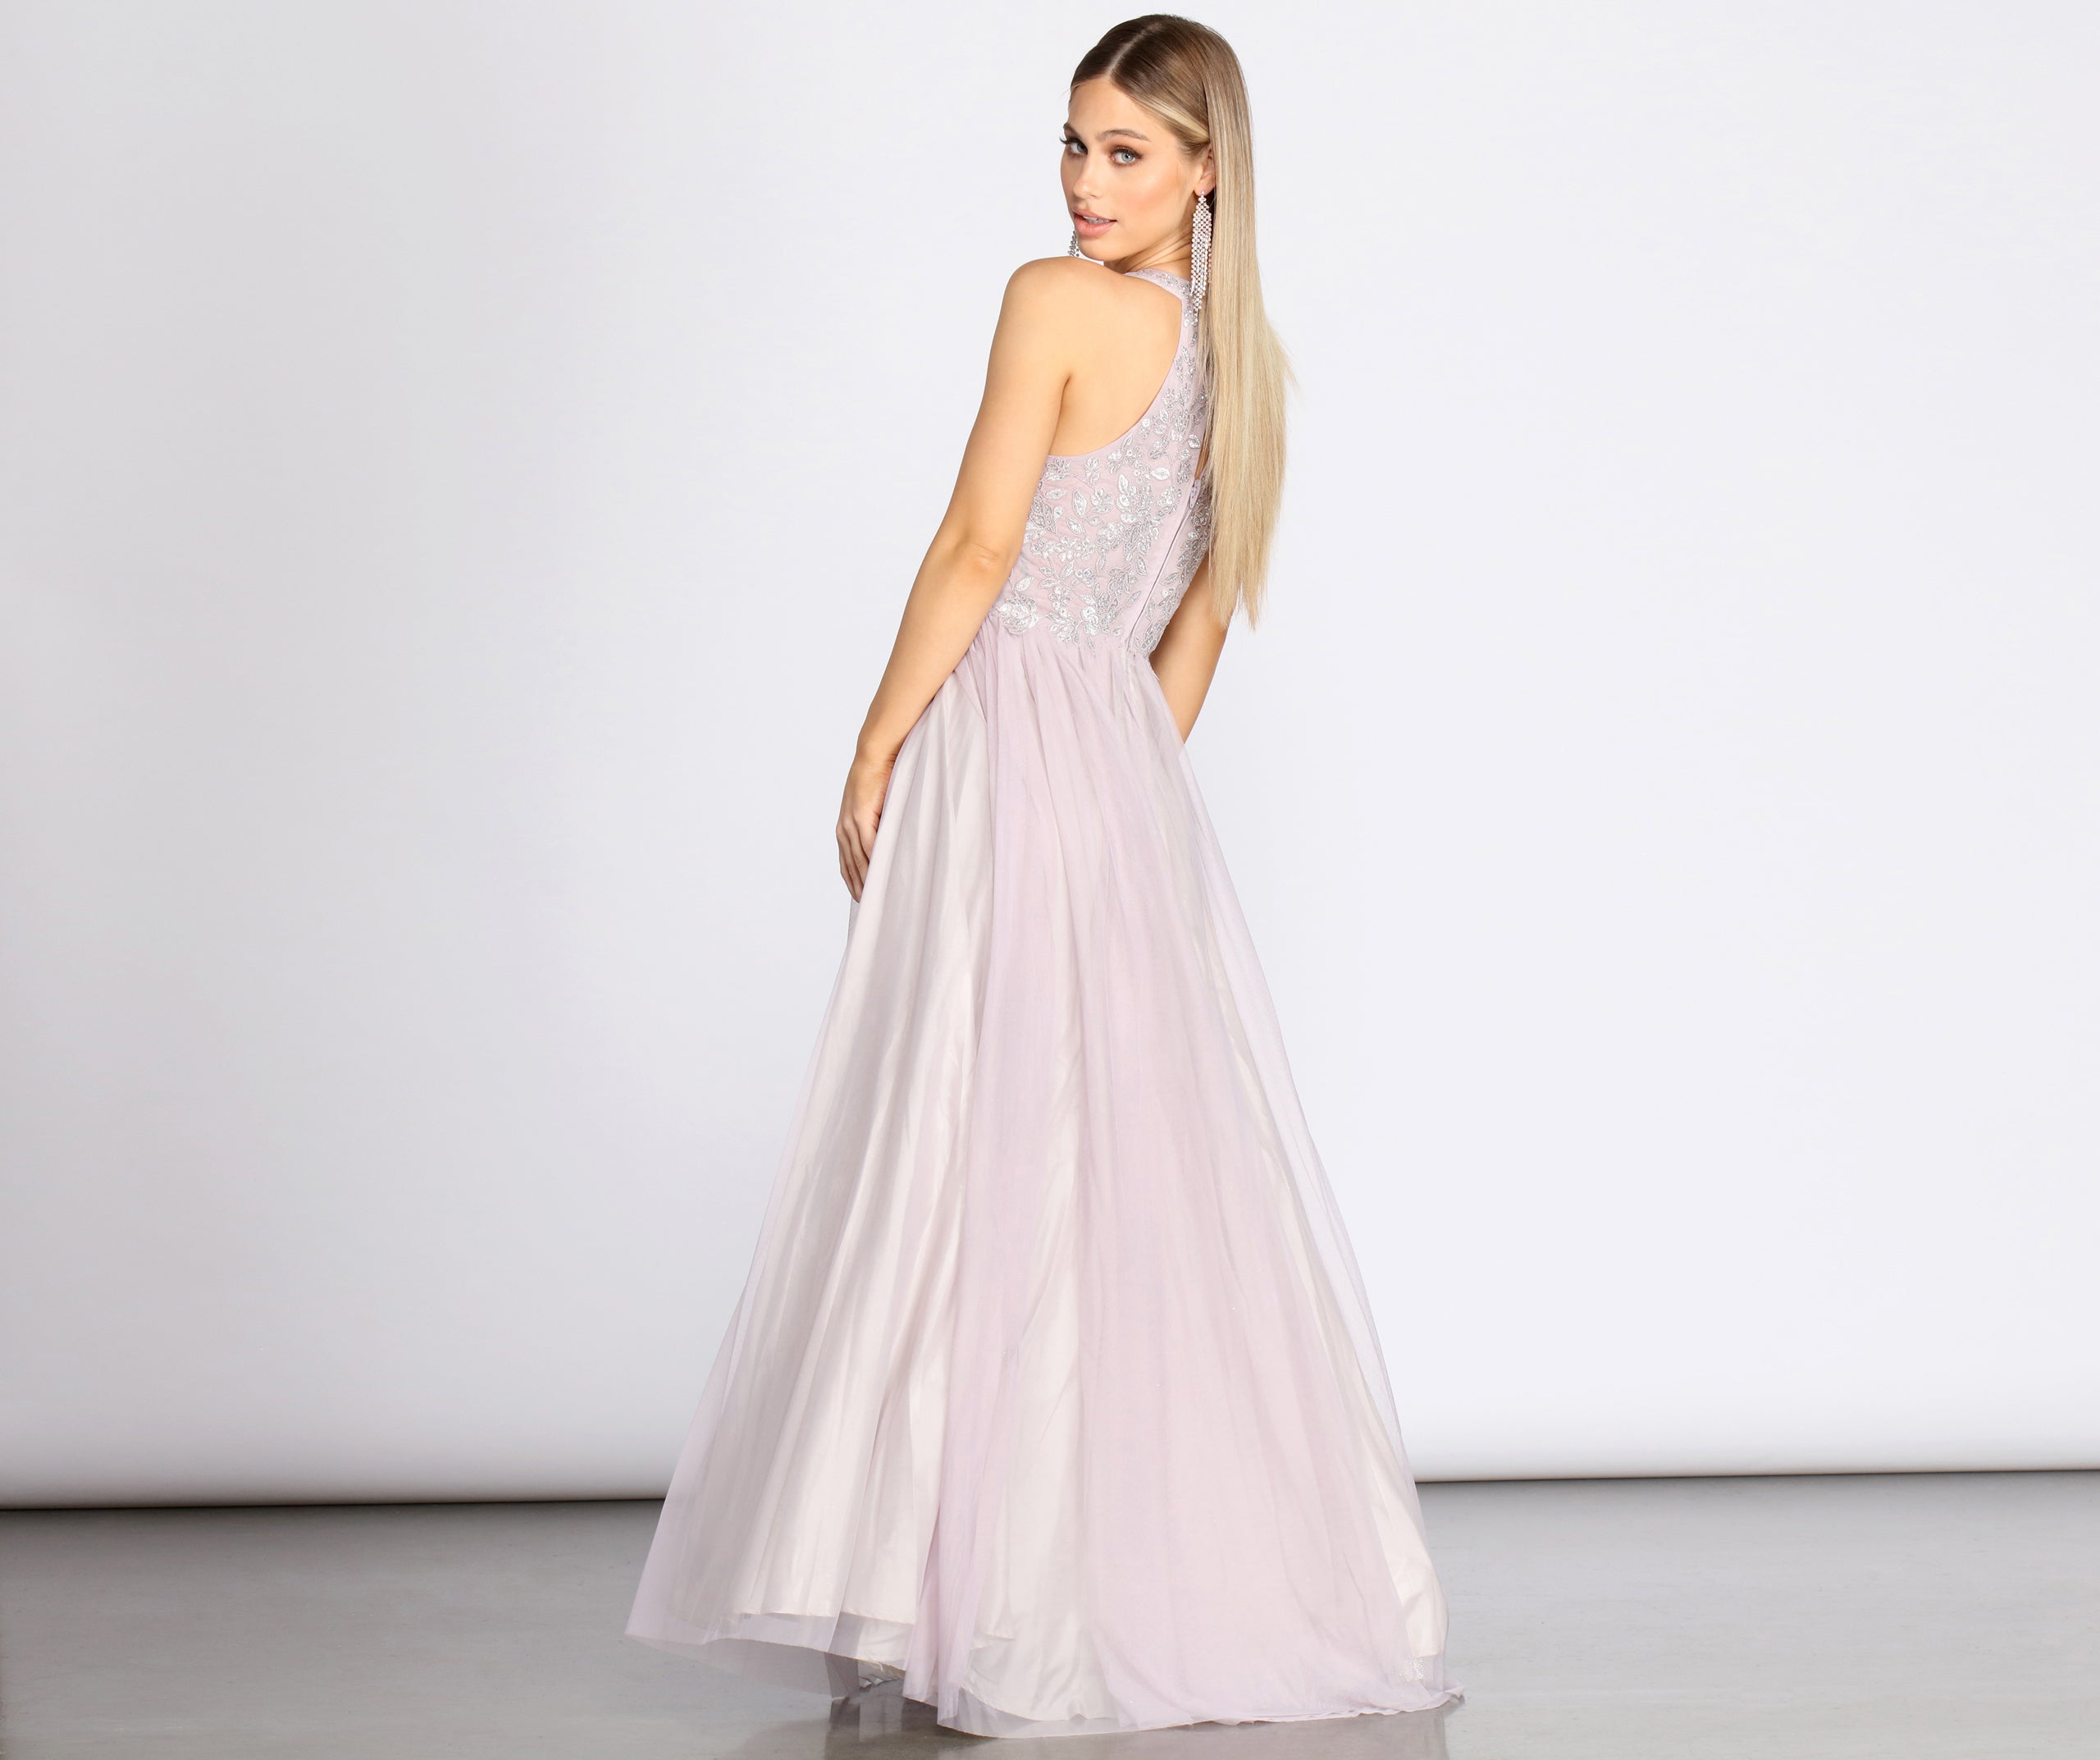 Briella Lace High Neck Tulle Ball Gown